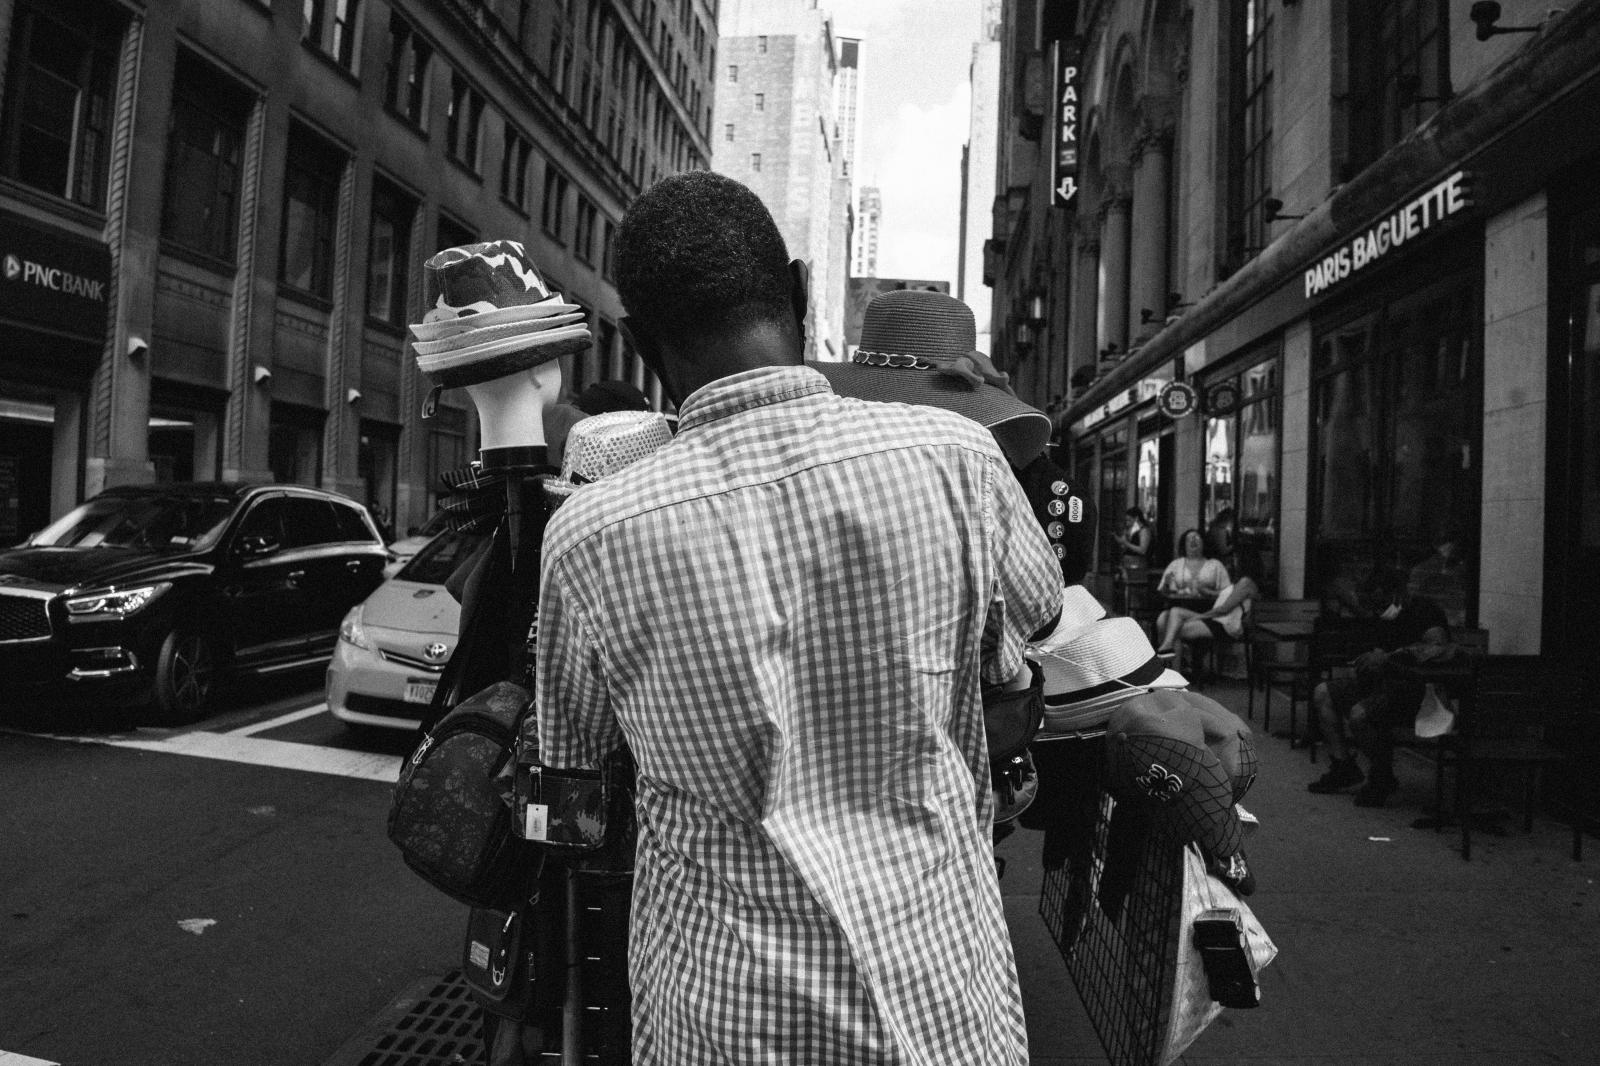 Streets of NY Hustle | Buy this image